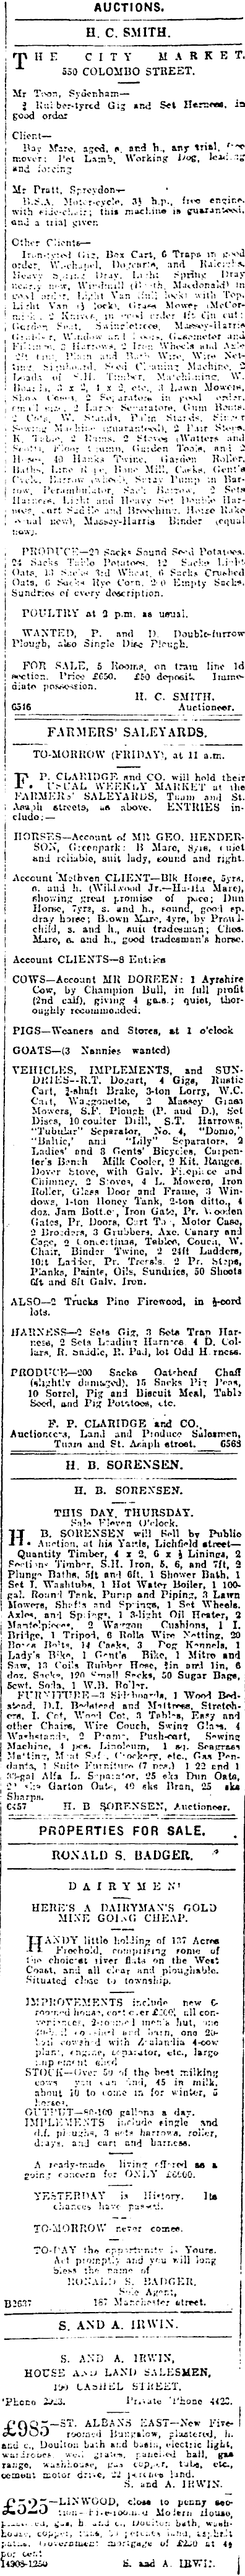 Papers Past Newspapers Press 4 December 1919 Page 12 Advertisements Column 7